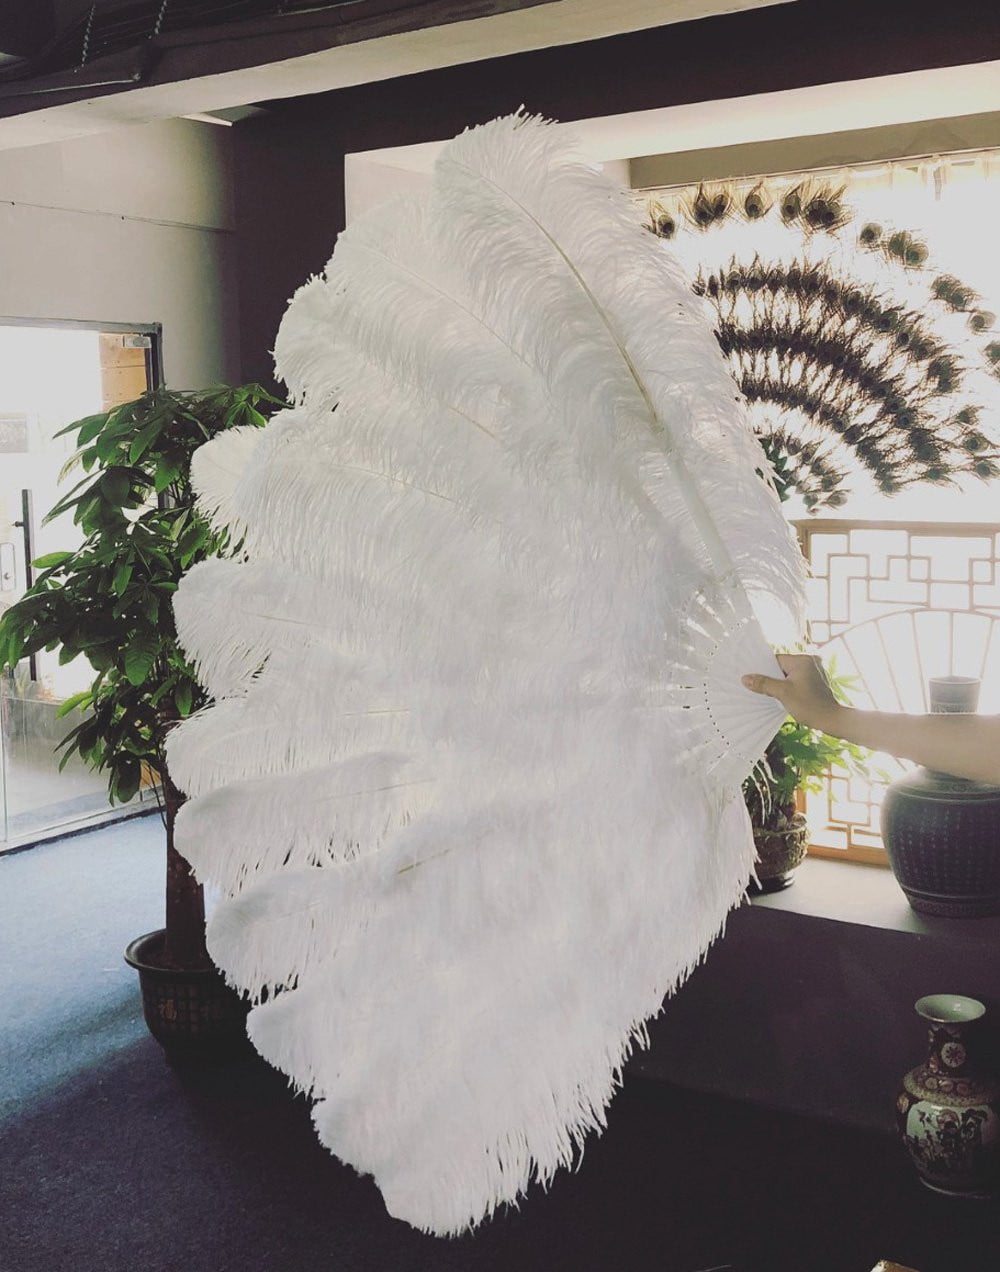 hotfans Mix White & Sky Blue XL 2 Layer Ostrich Feather Fan 34''x 60'' with Travel Leather Bag Left Hand Fan / Matching Color Staves